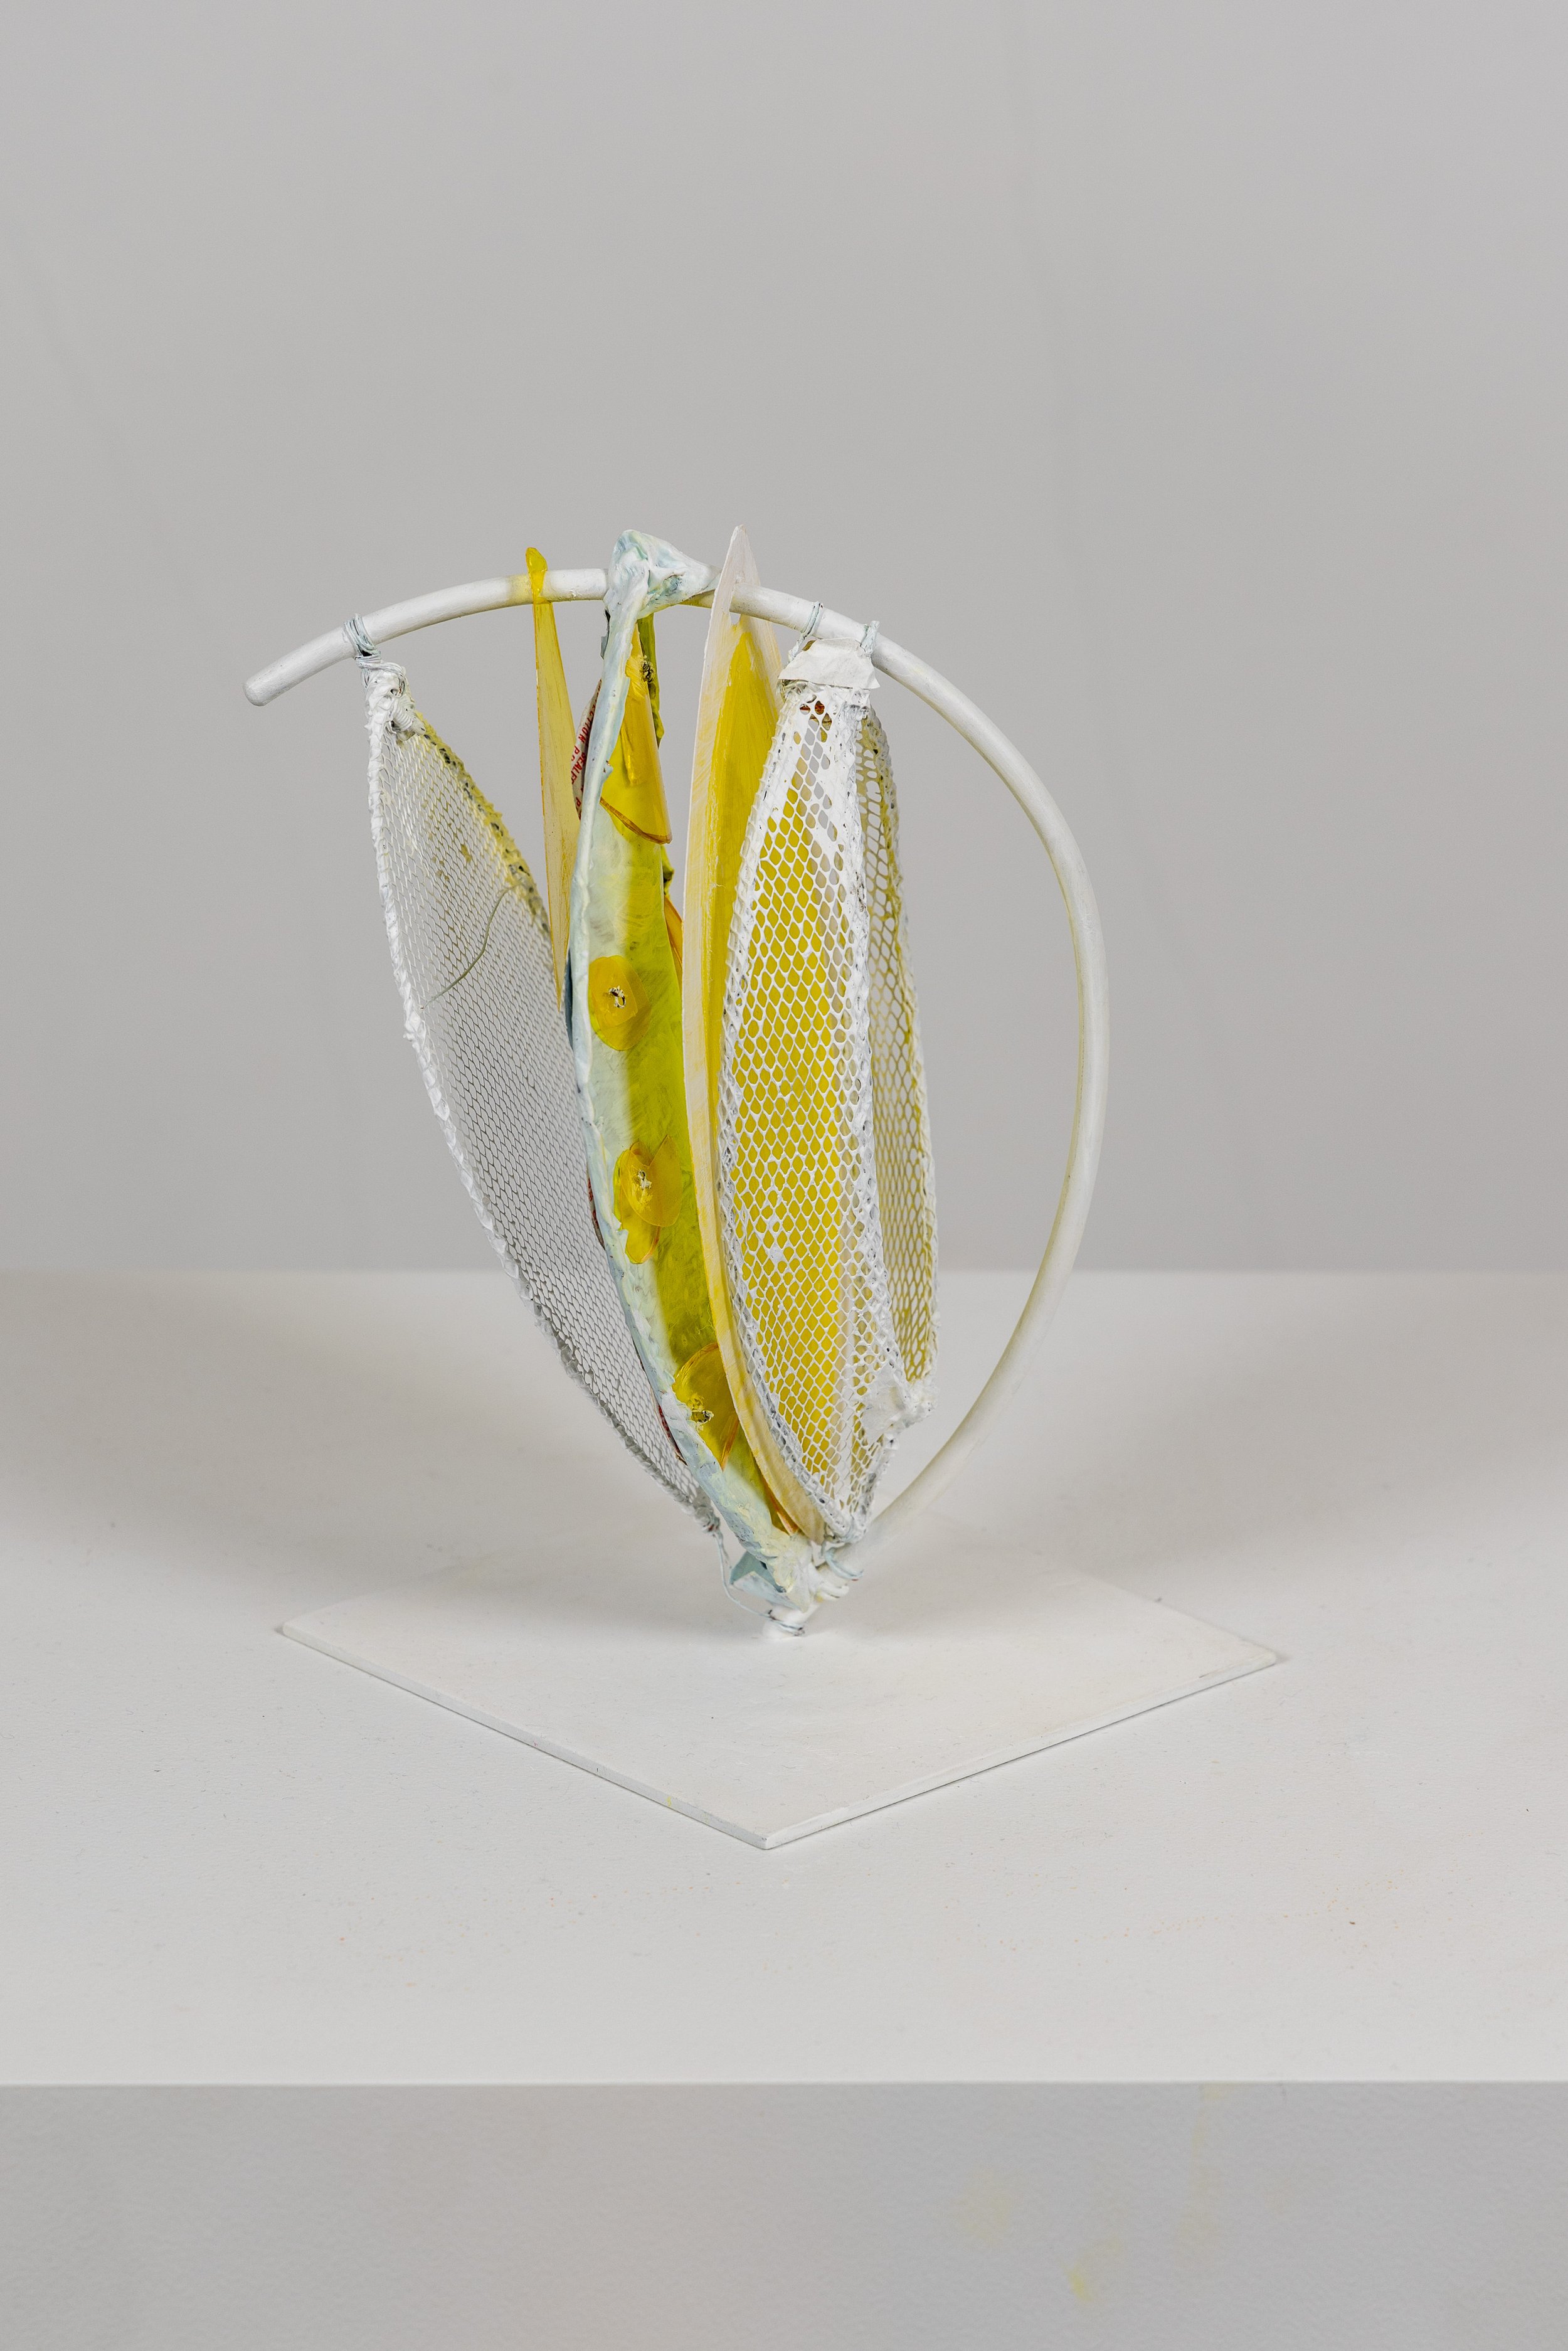 Elisa Lendvay, Armor (Yolk, thought plane, headspace), 2021 steel, copper wire, wire mesh, gel, paper, gesso, oil pastel, 10 x 9 x 8.5 inches